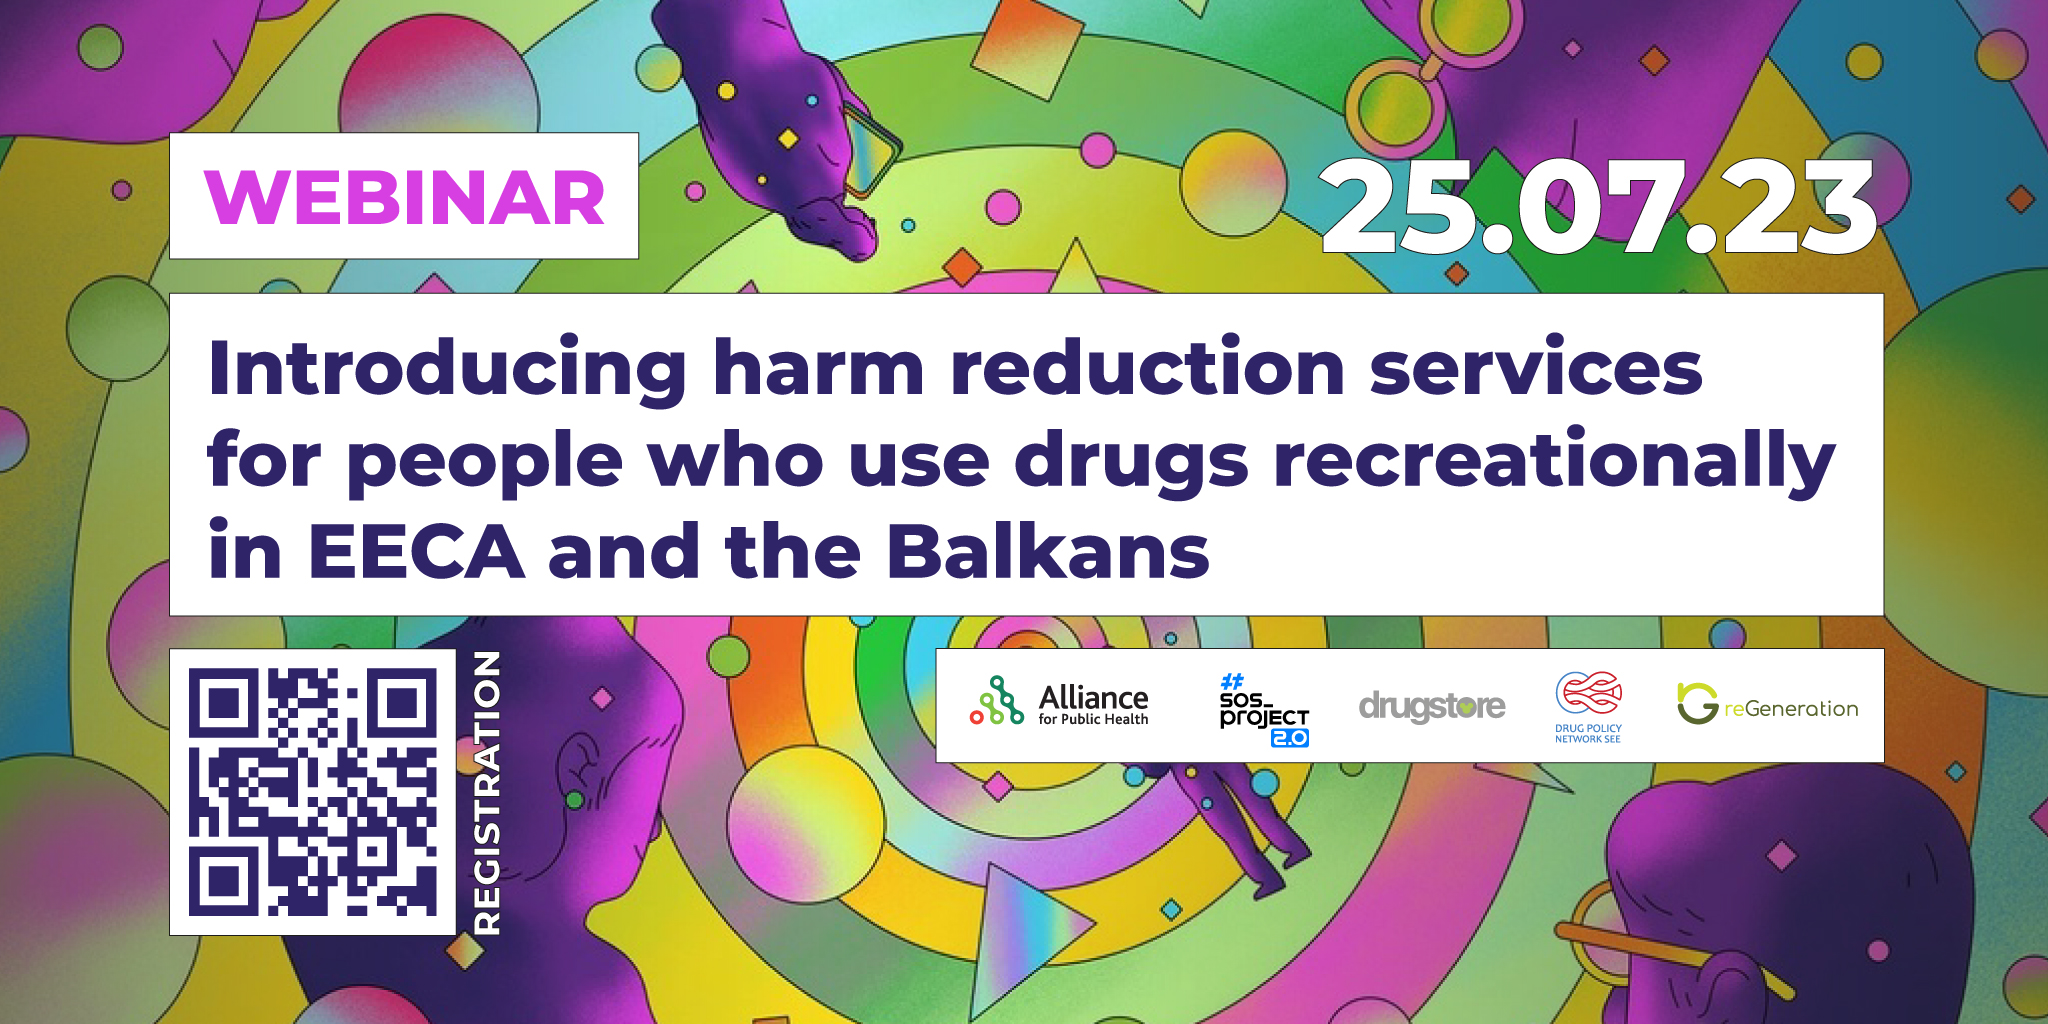 Harm reduction services for people who use drugs recreationally